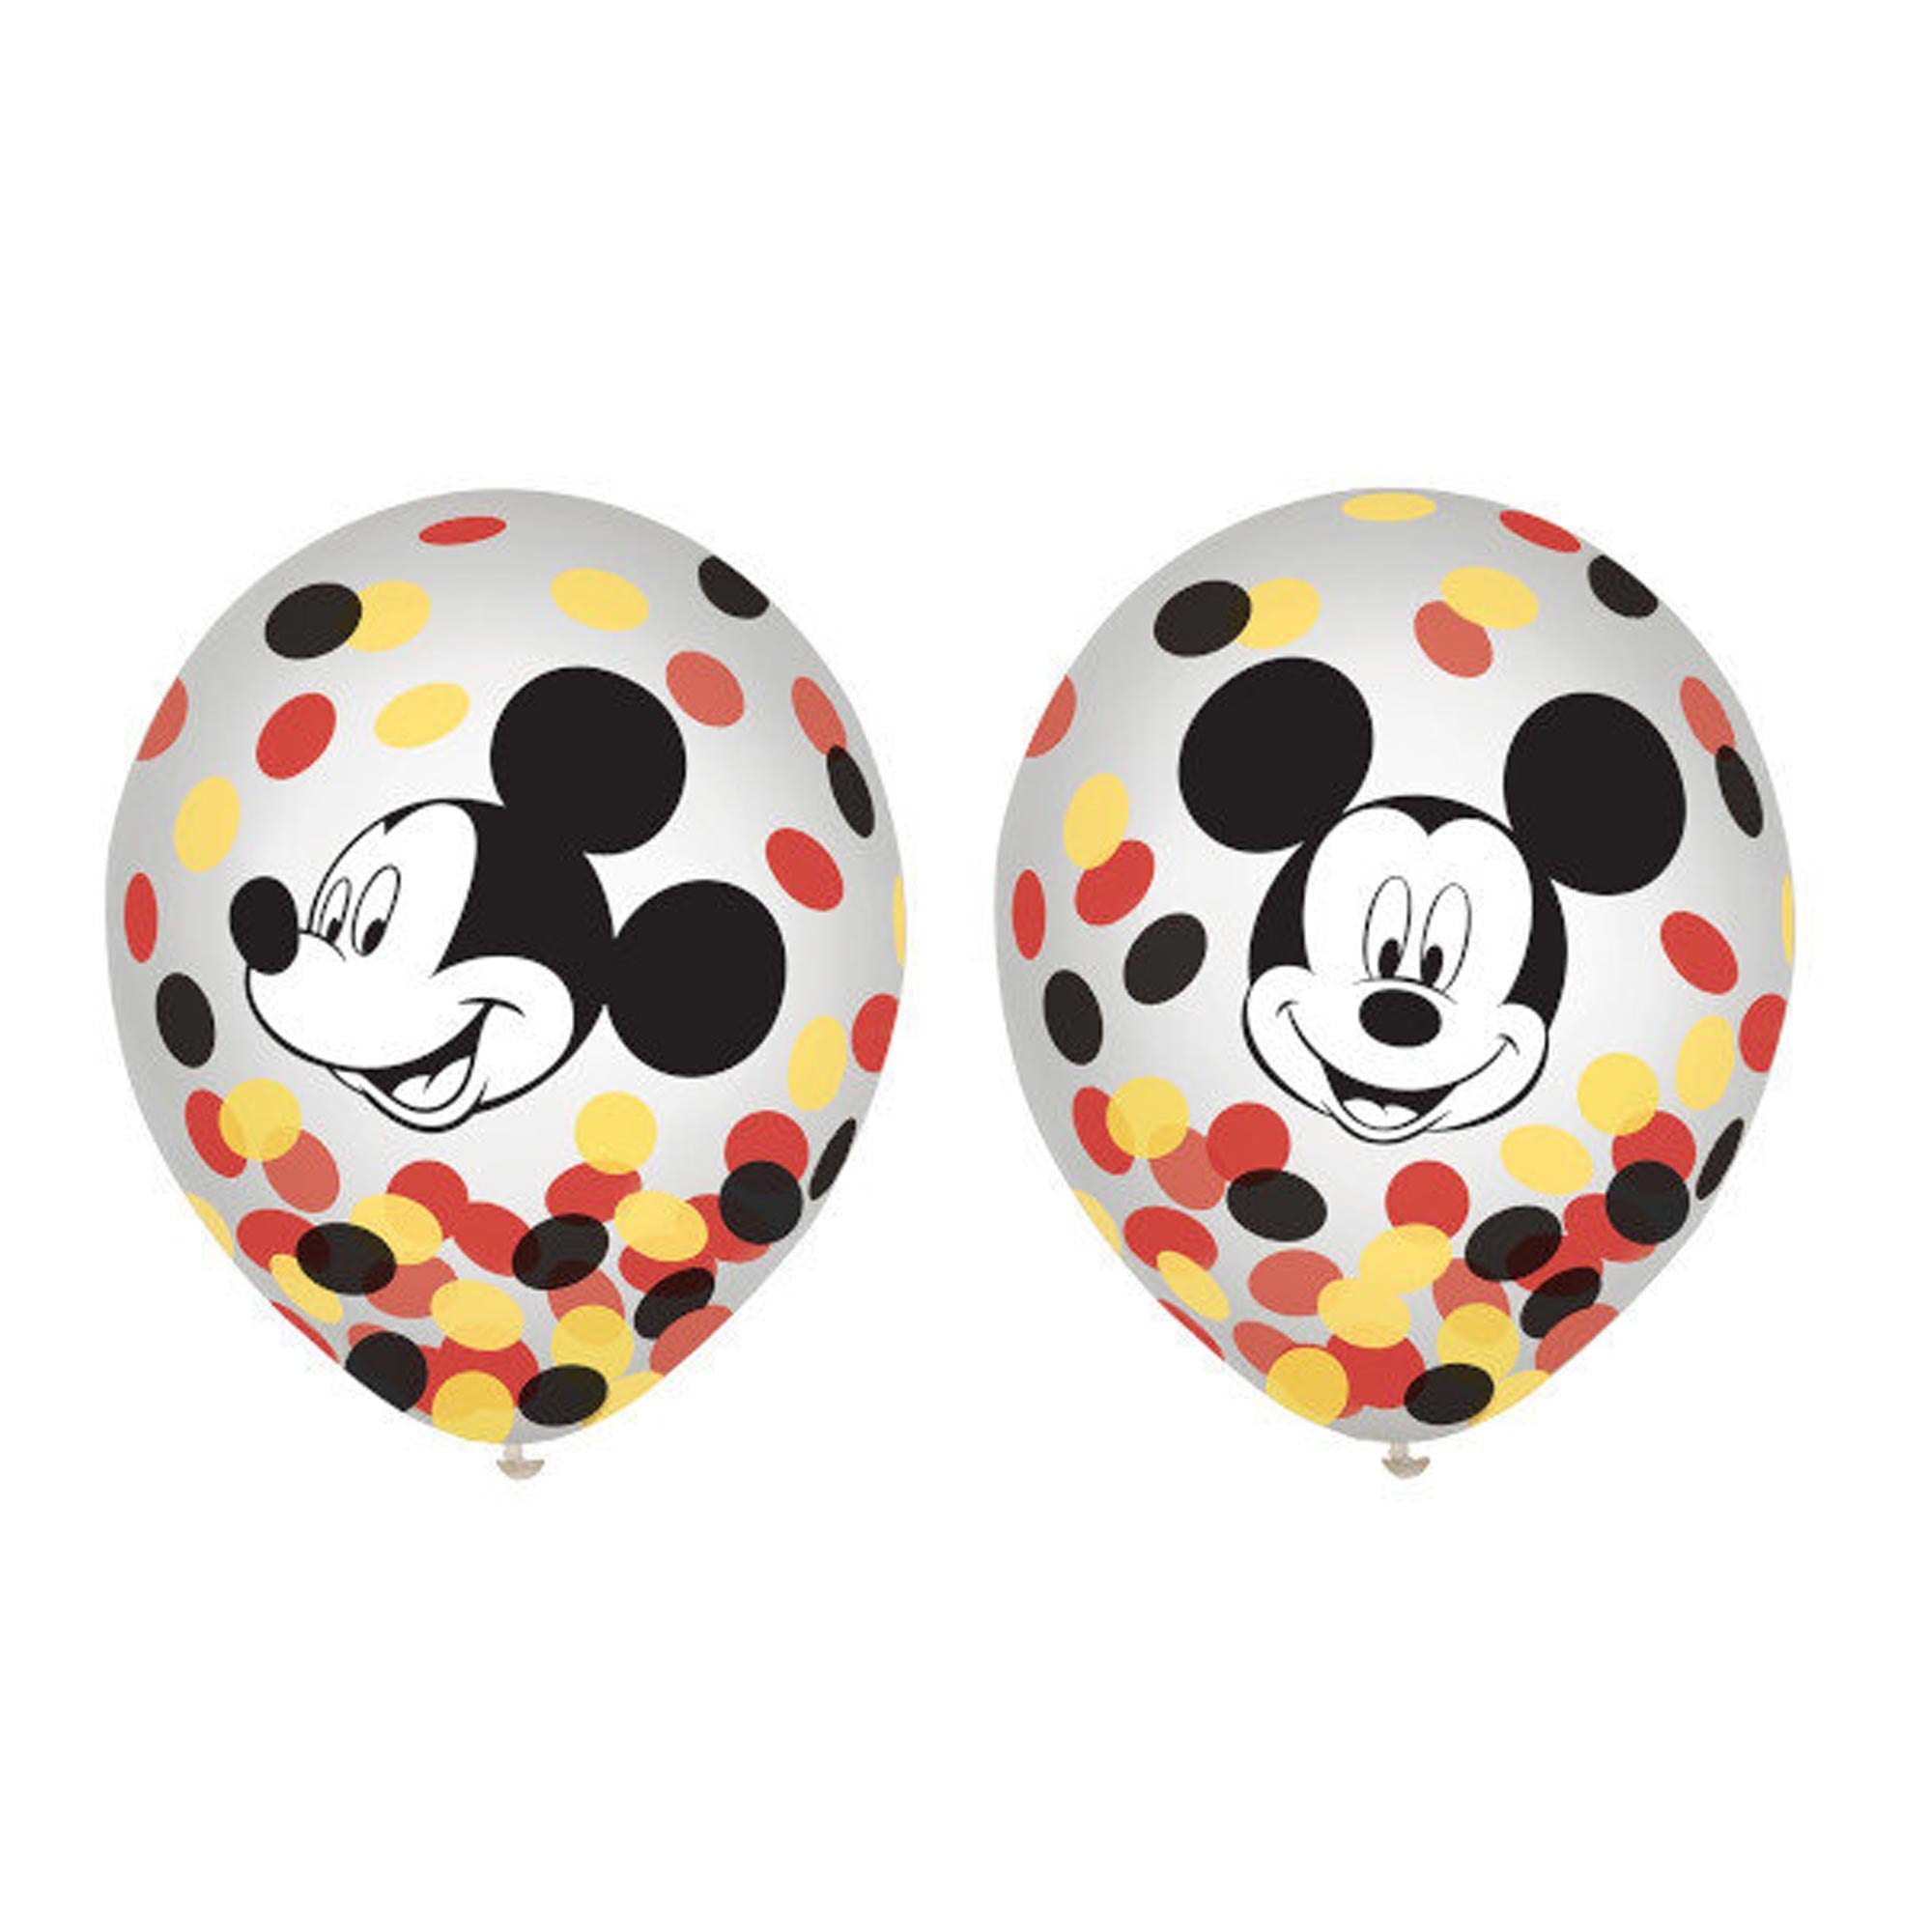 Mickey Mouse Forever Latex Balloon with Confetti Balloon 12in, 6pcs